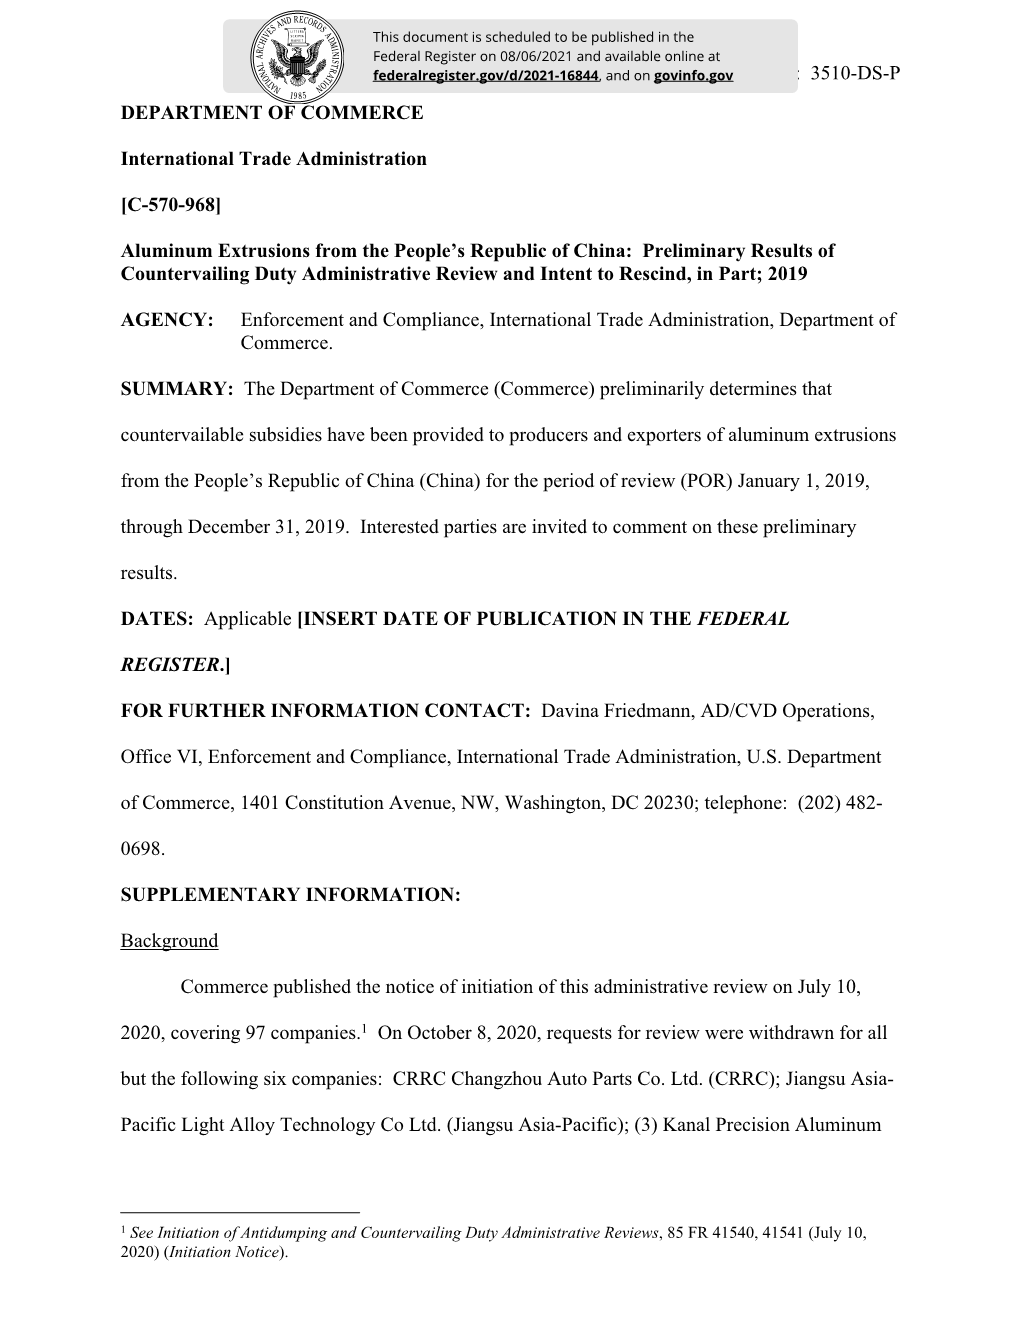 Aluminum Extrusions from the People’S Republic of China: Preliminary Results of Countervailing Duty Administrative Review and Intent to Rescind, in Part; 2019